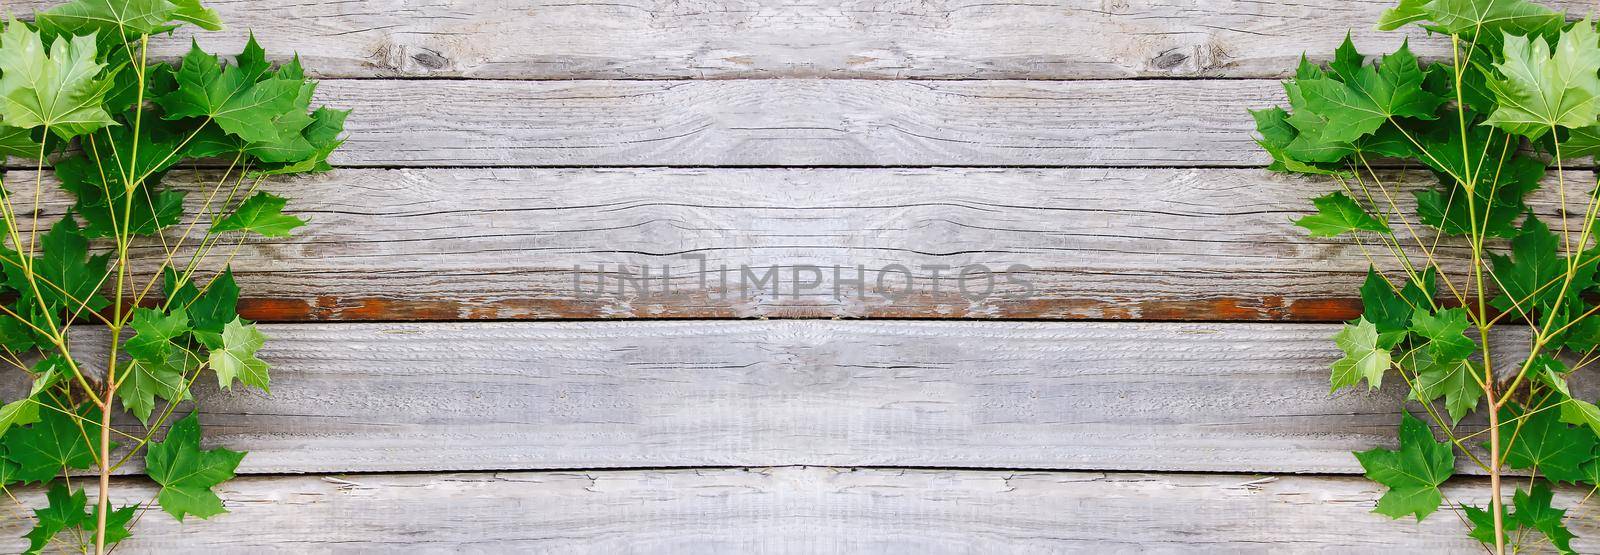 Old grunge wood texture with green leaves. Rough natural texture